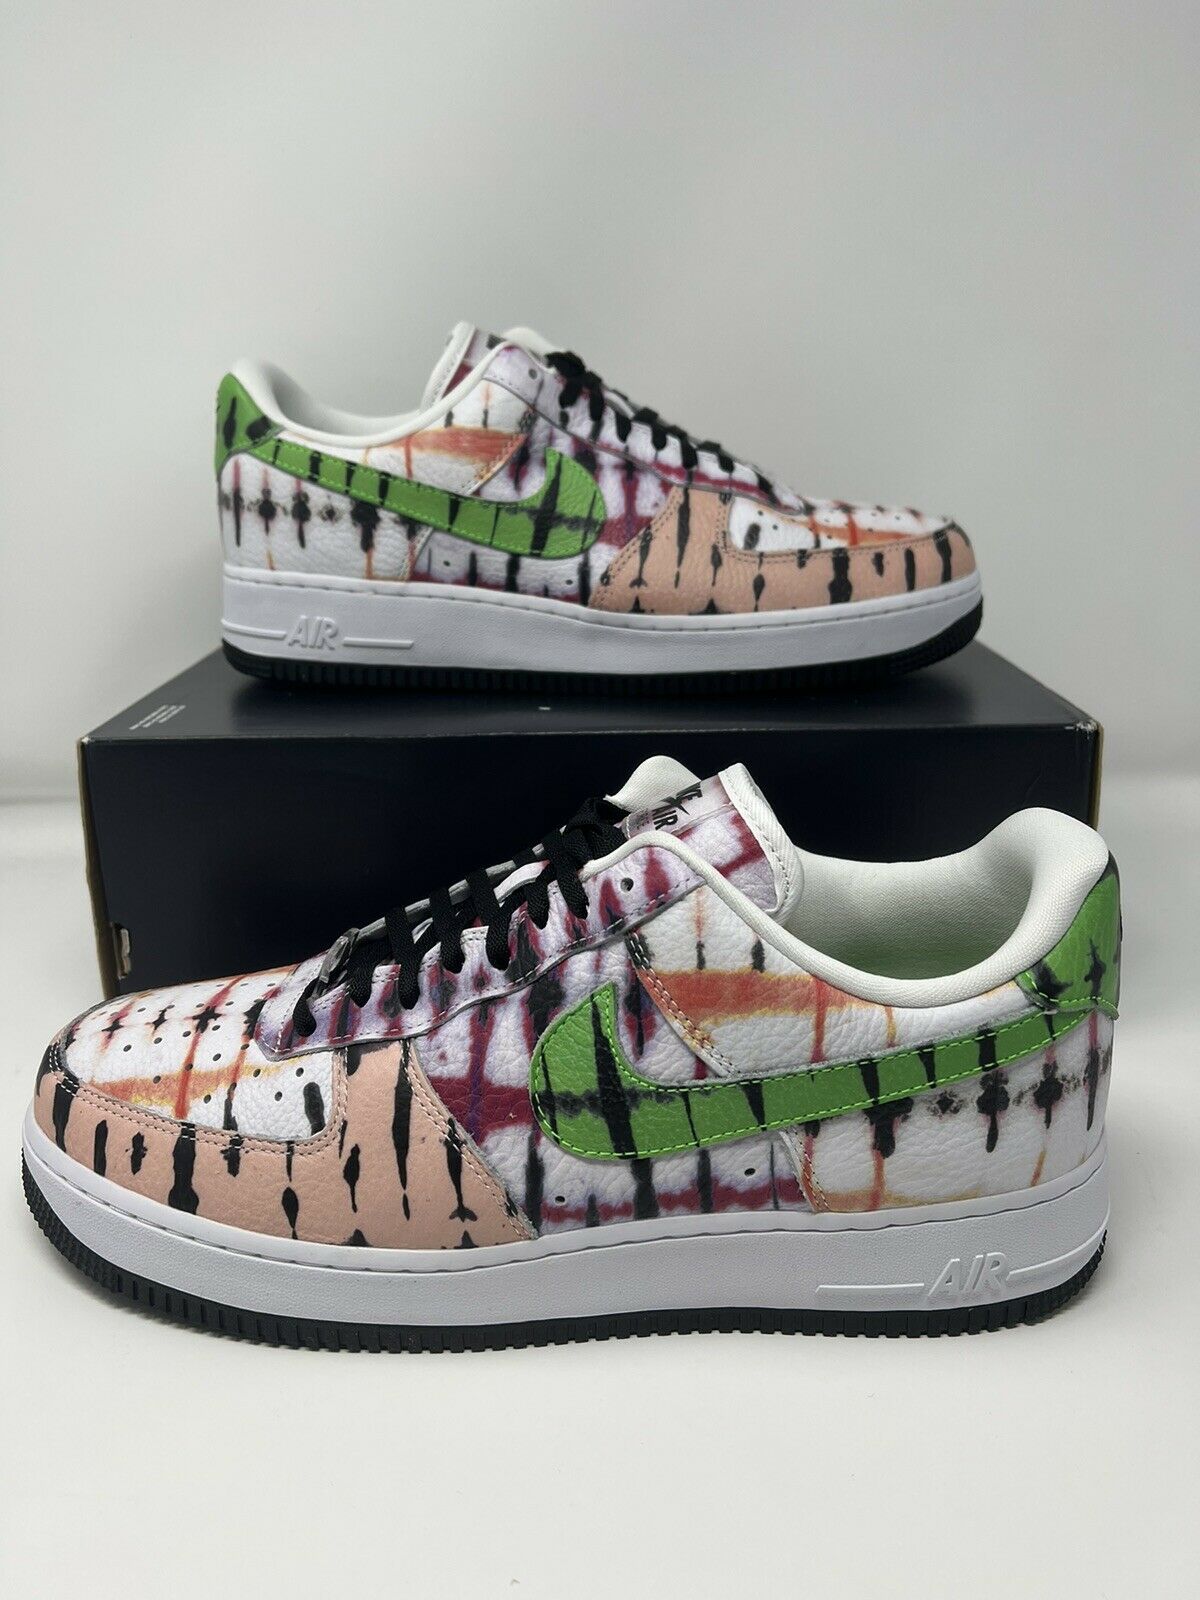 Nike Air Force 1 Women's Shoes White Black Tie Die [cw1267-101] Size 8 Wmns